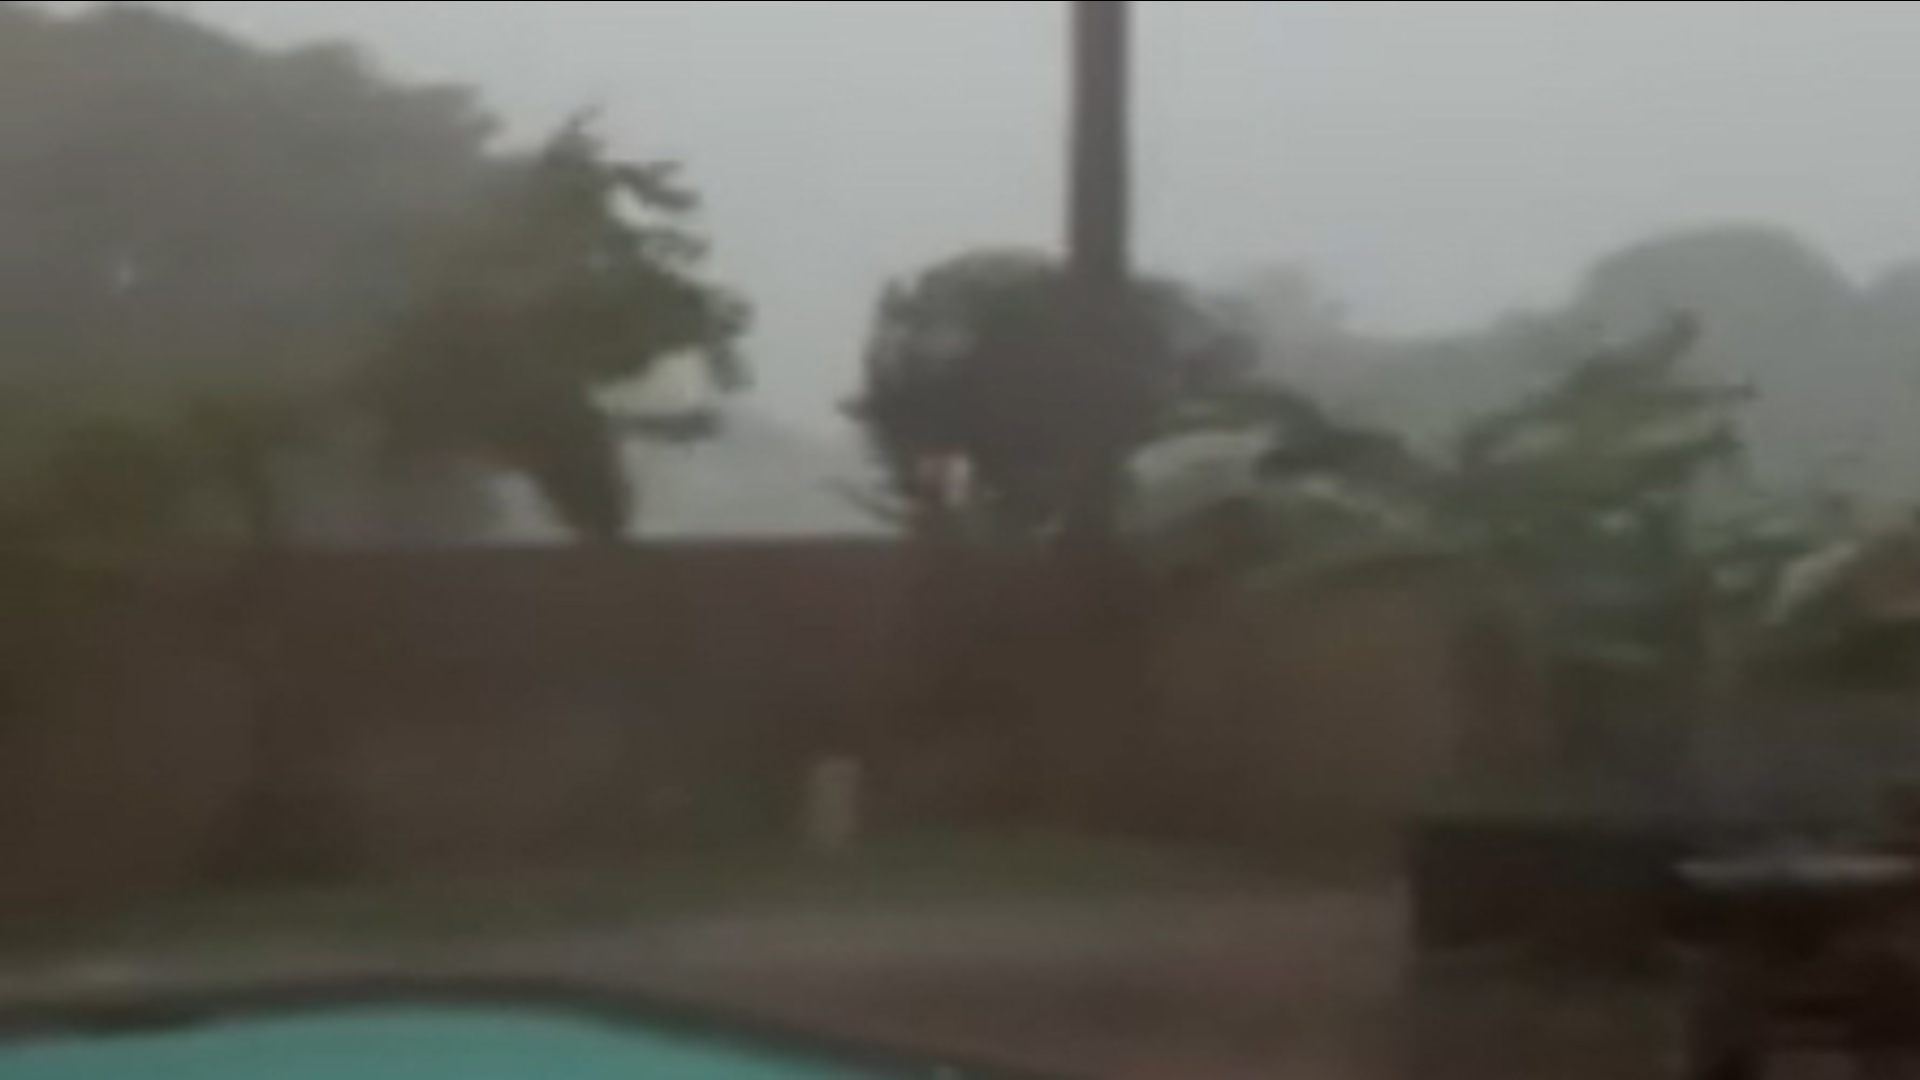 Wendy Gonzalez shared this video with us of the storms as they blew through Katy.